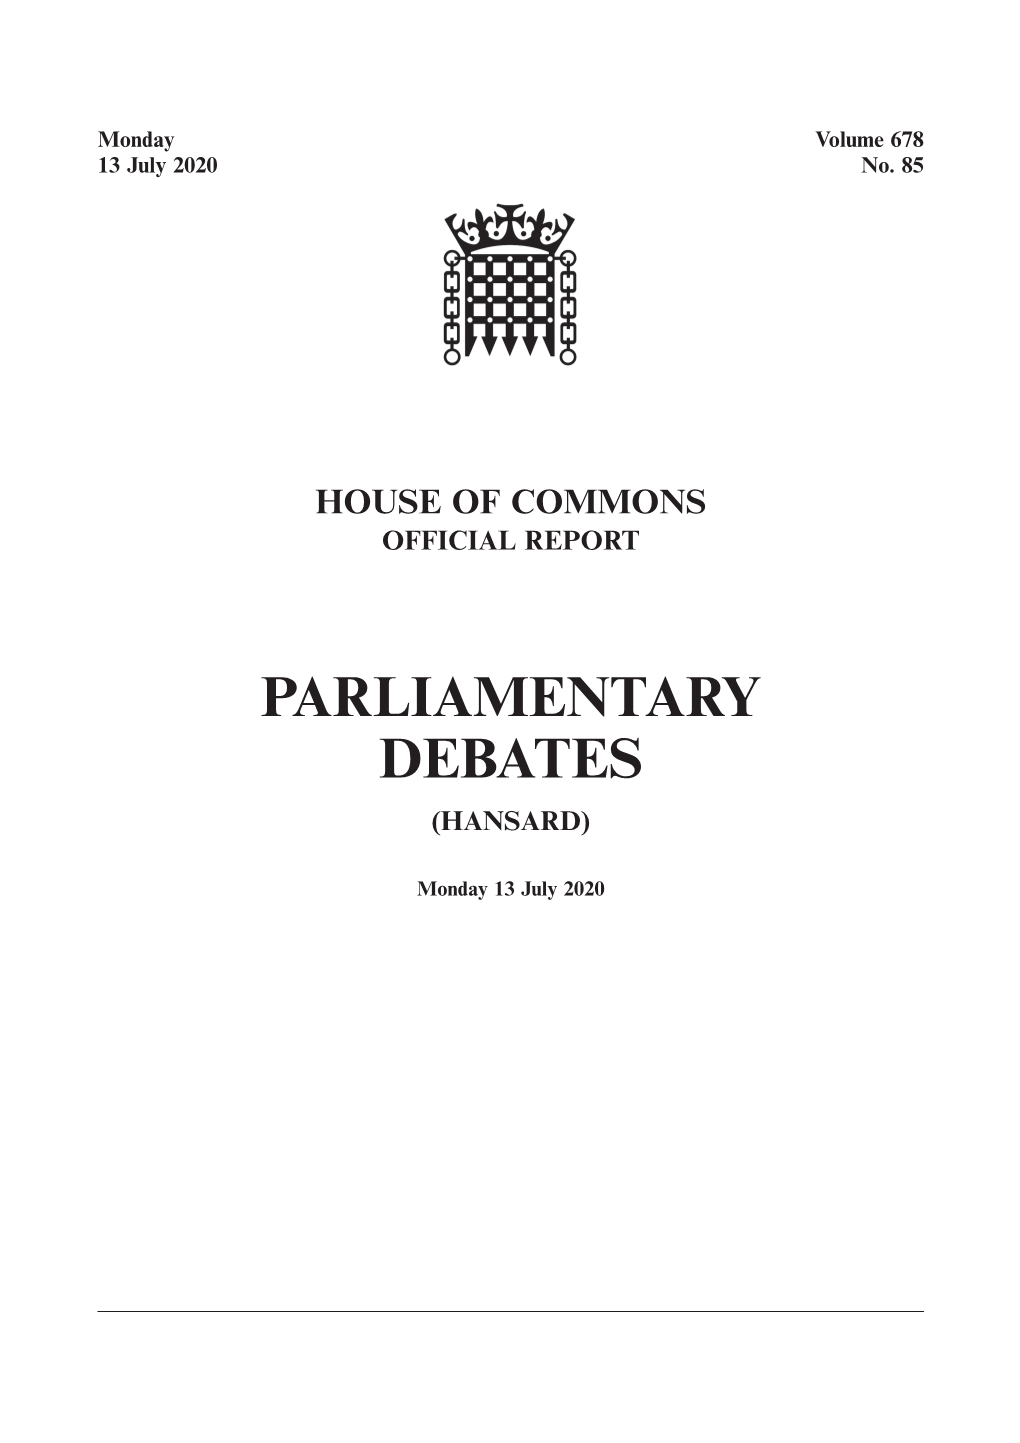 Whole Day Download the Hansard Record of the Entire Day in PDF Format. PDF File, 0.69